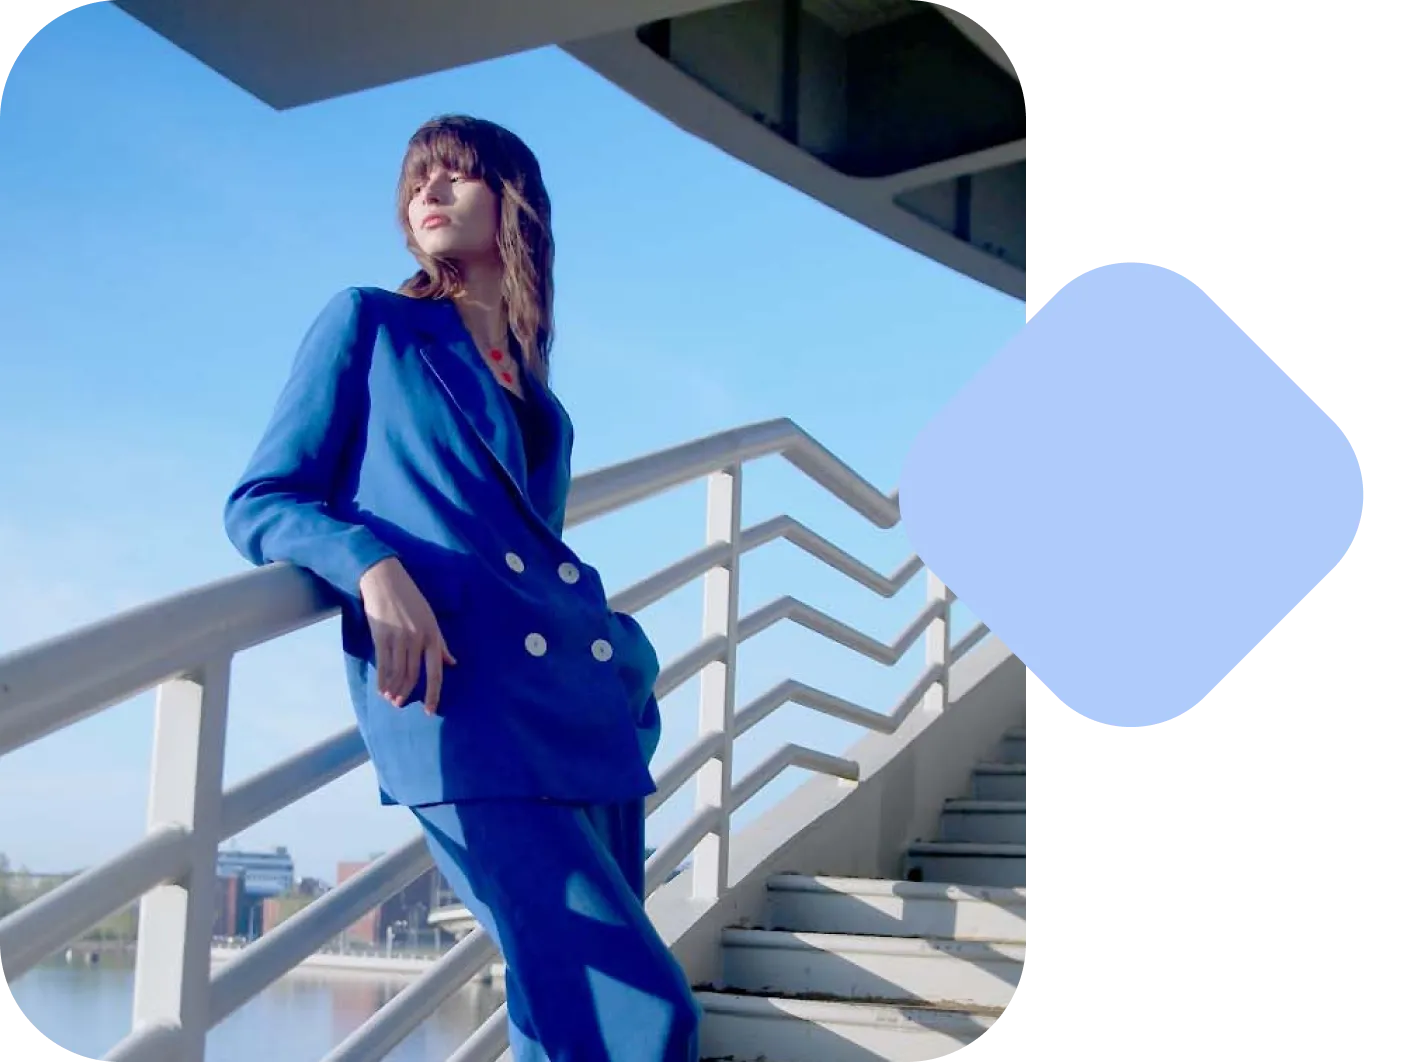 An image of a Lens shopping use case featuring a woman with a blue blazer with an overlapping blue shape.